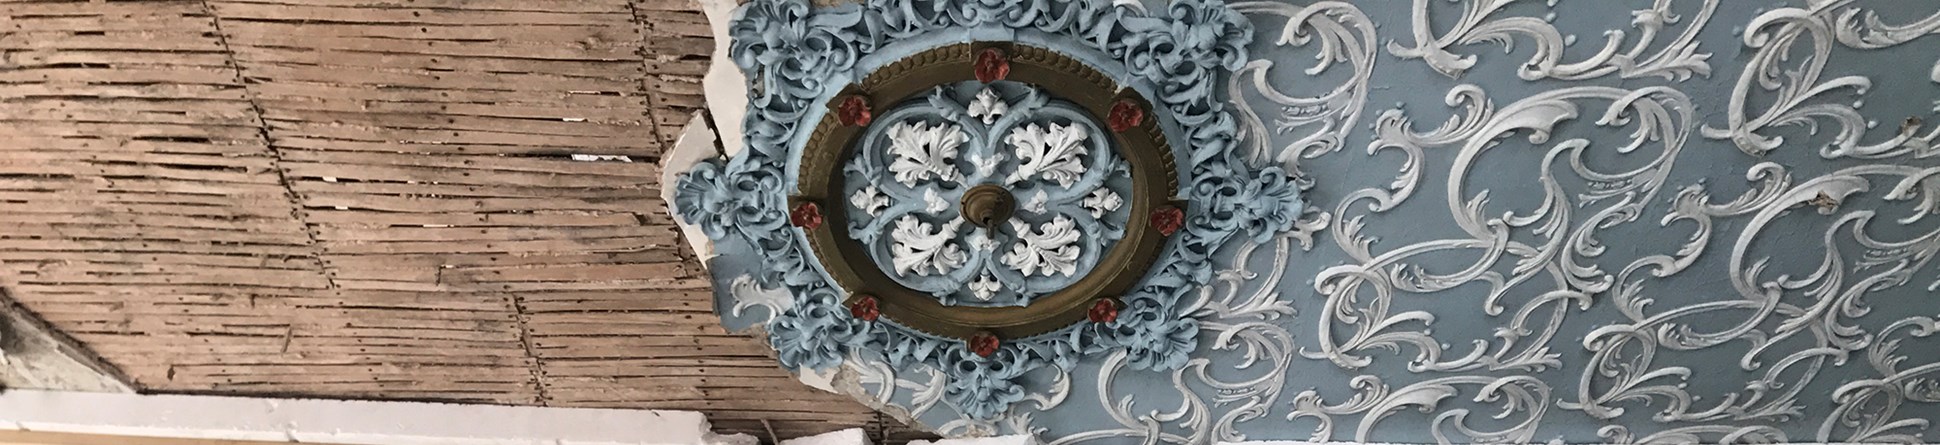 Victorian ‘Lincrusta’ wallpaper on the ceiling of the Blue Room, photographed during repairs